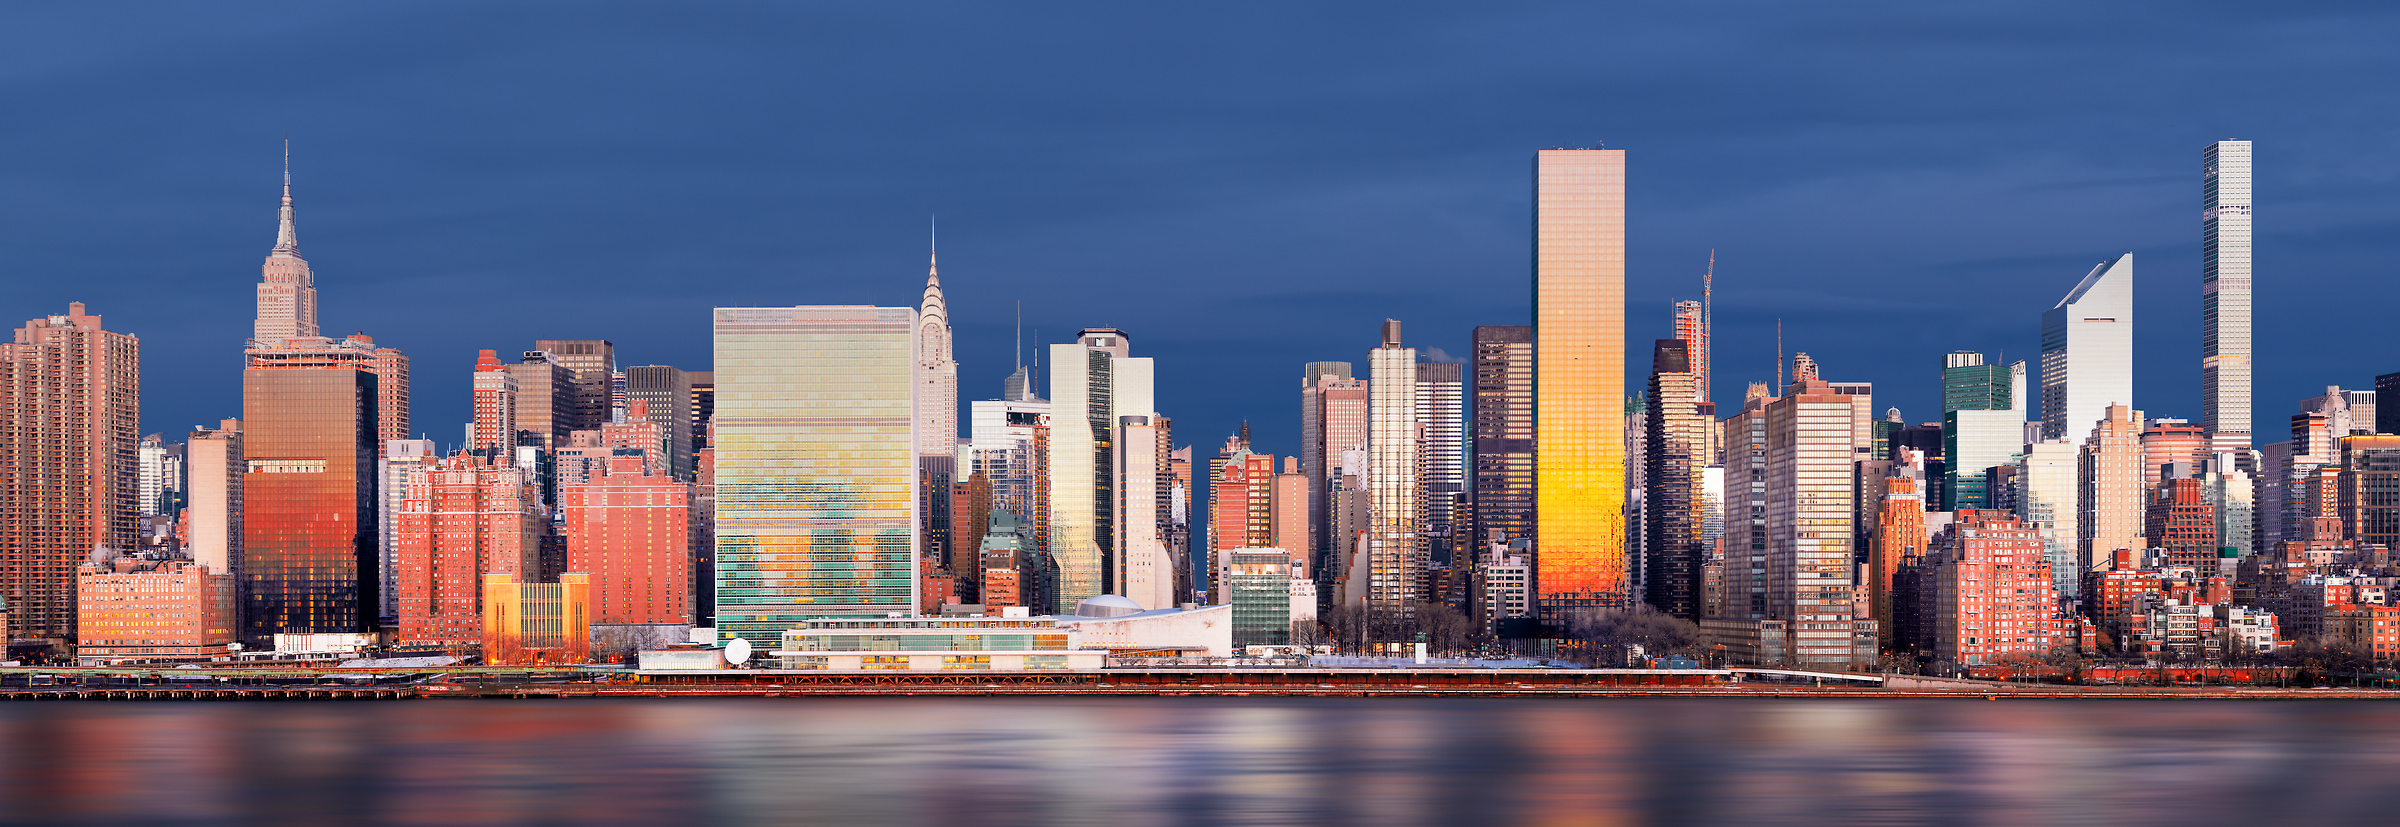 986 megapixels! A very high resolution, large-format VAST photo of the New York City skyline; gigapixel photograph created by Dan Piech in Manhattan.